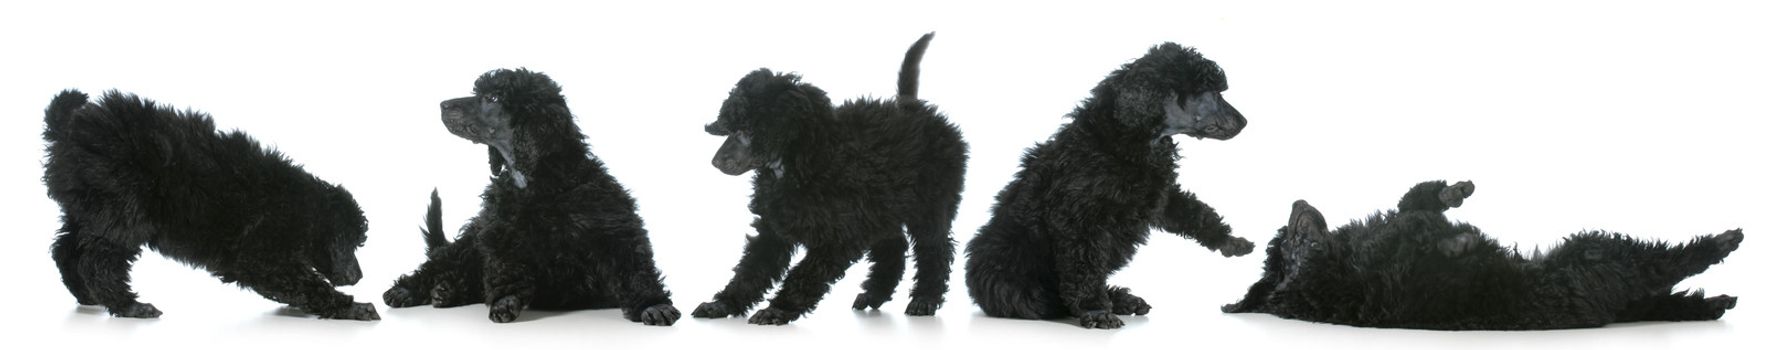 playful puppies - five standard poodle puppies playing isolated on white background - 8 weeks old